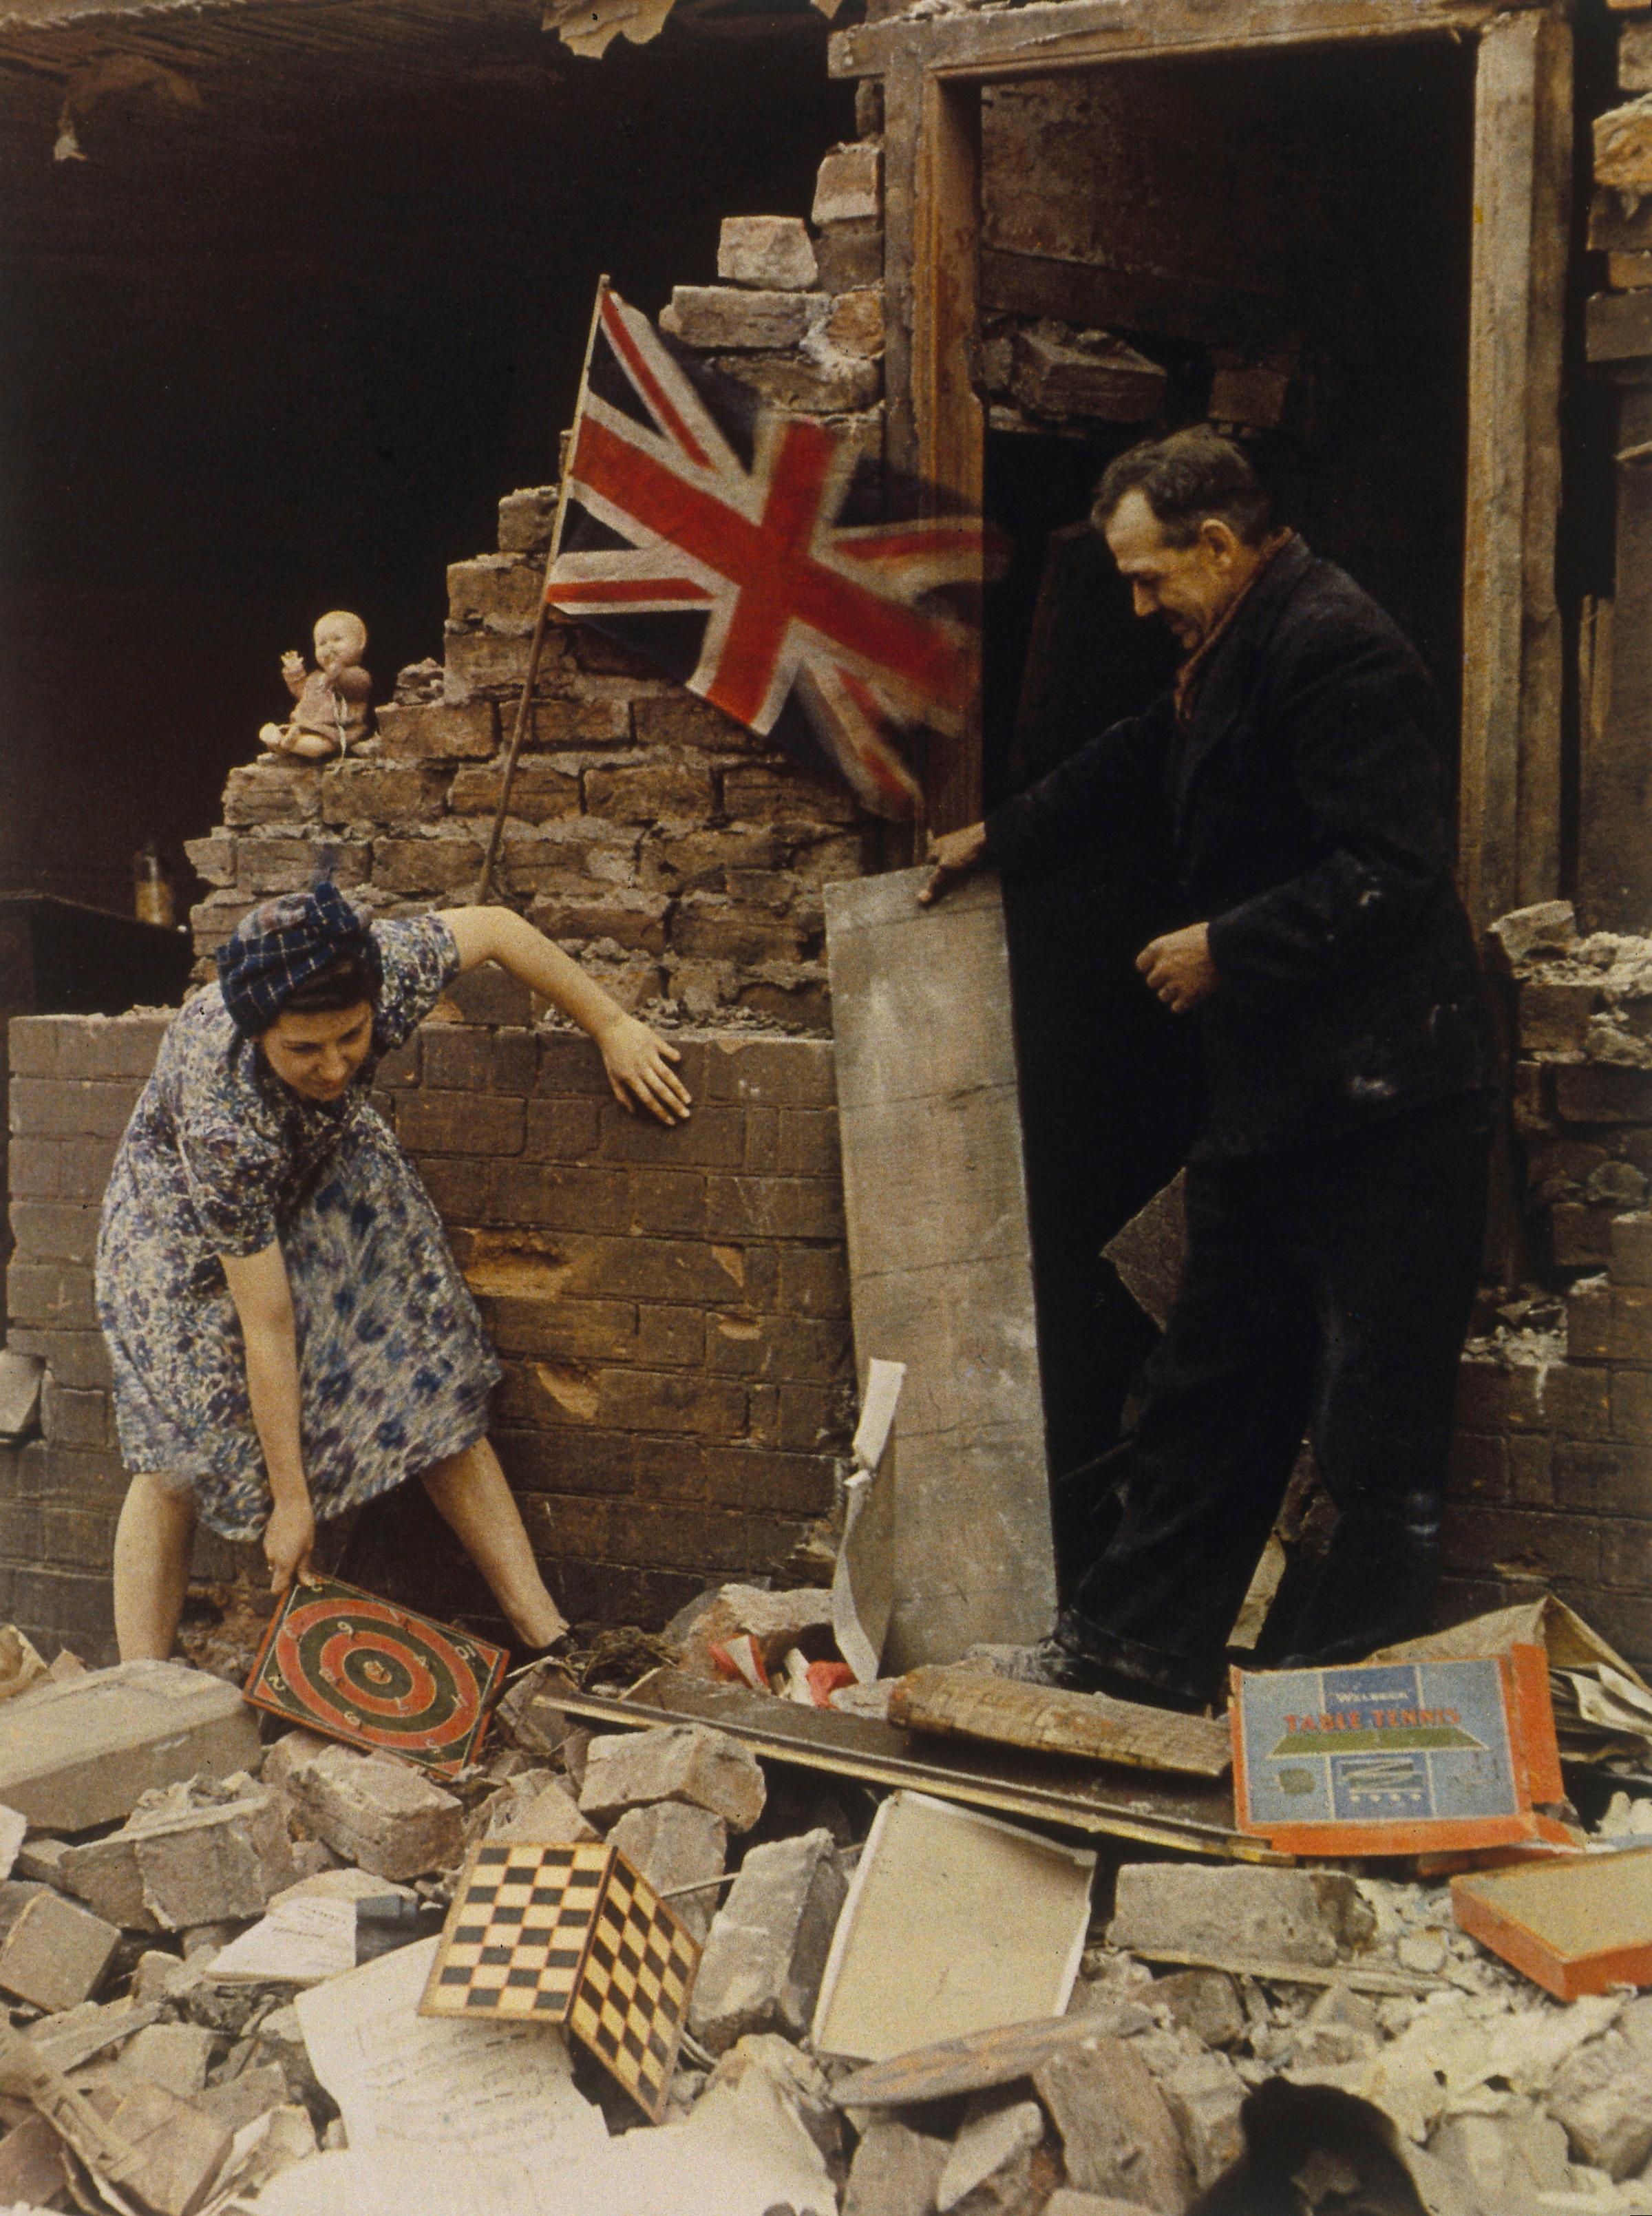 Woman saving board games from bomb wreckage, London, 1939-1945.